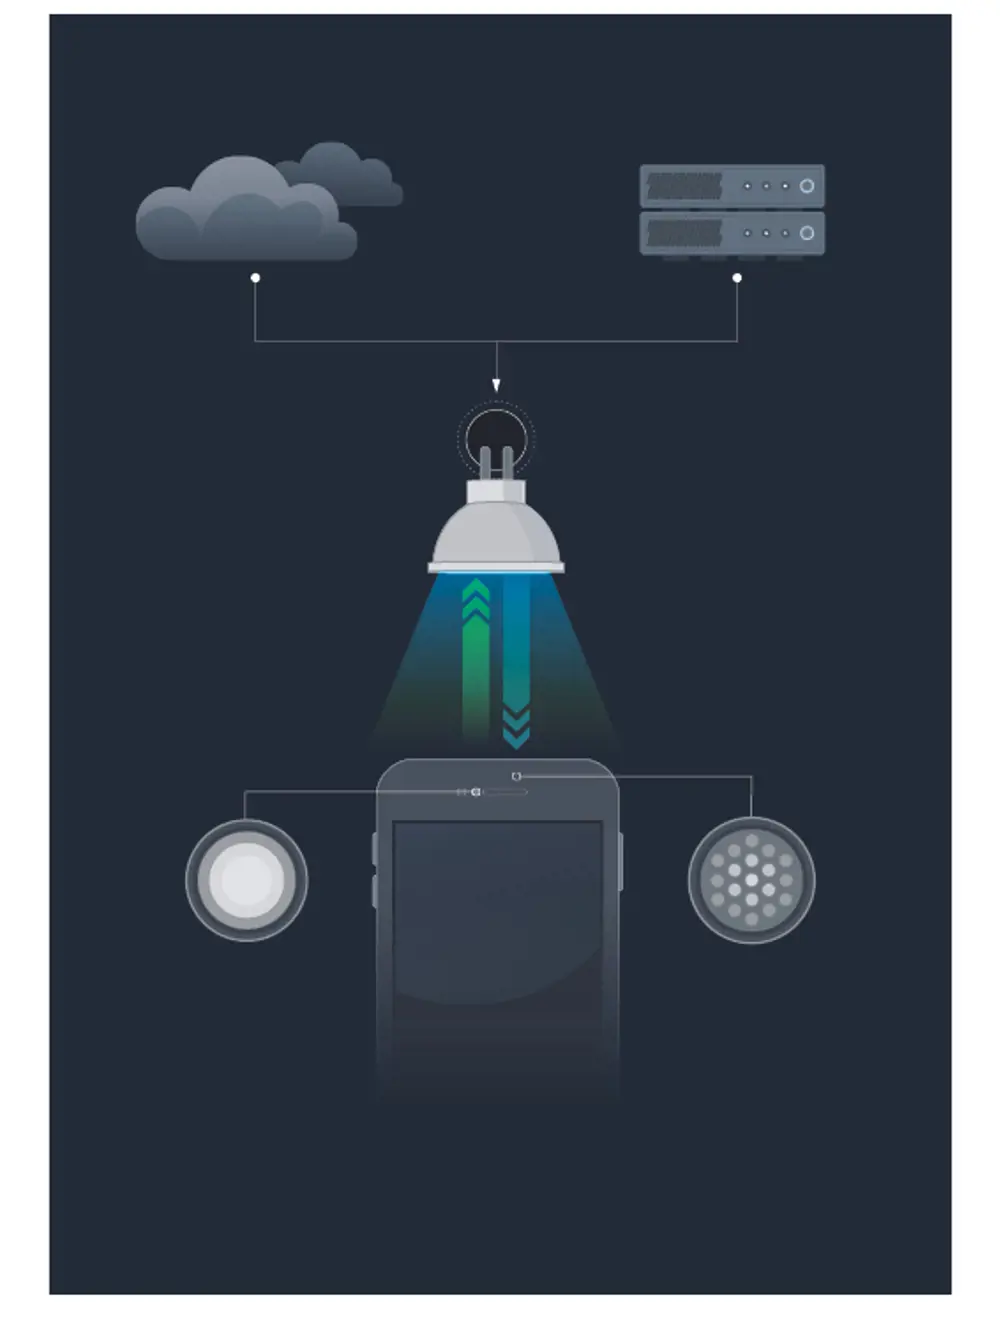 A digital illustration of the top half of a mobile phone containing a infrared transmitter and a photodetector to be able to communicate through Li-Fi.